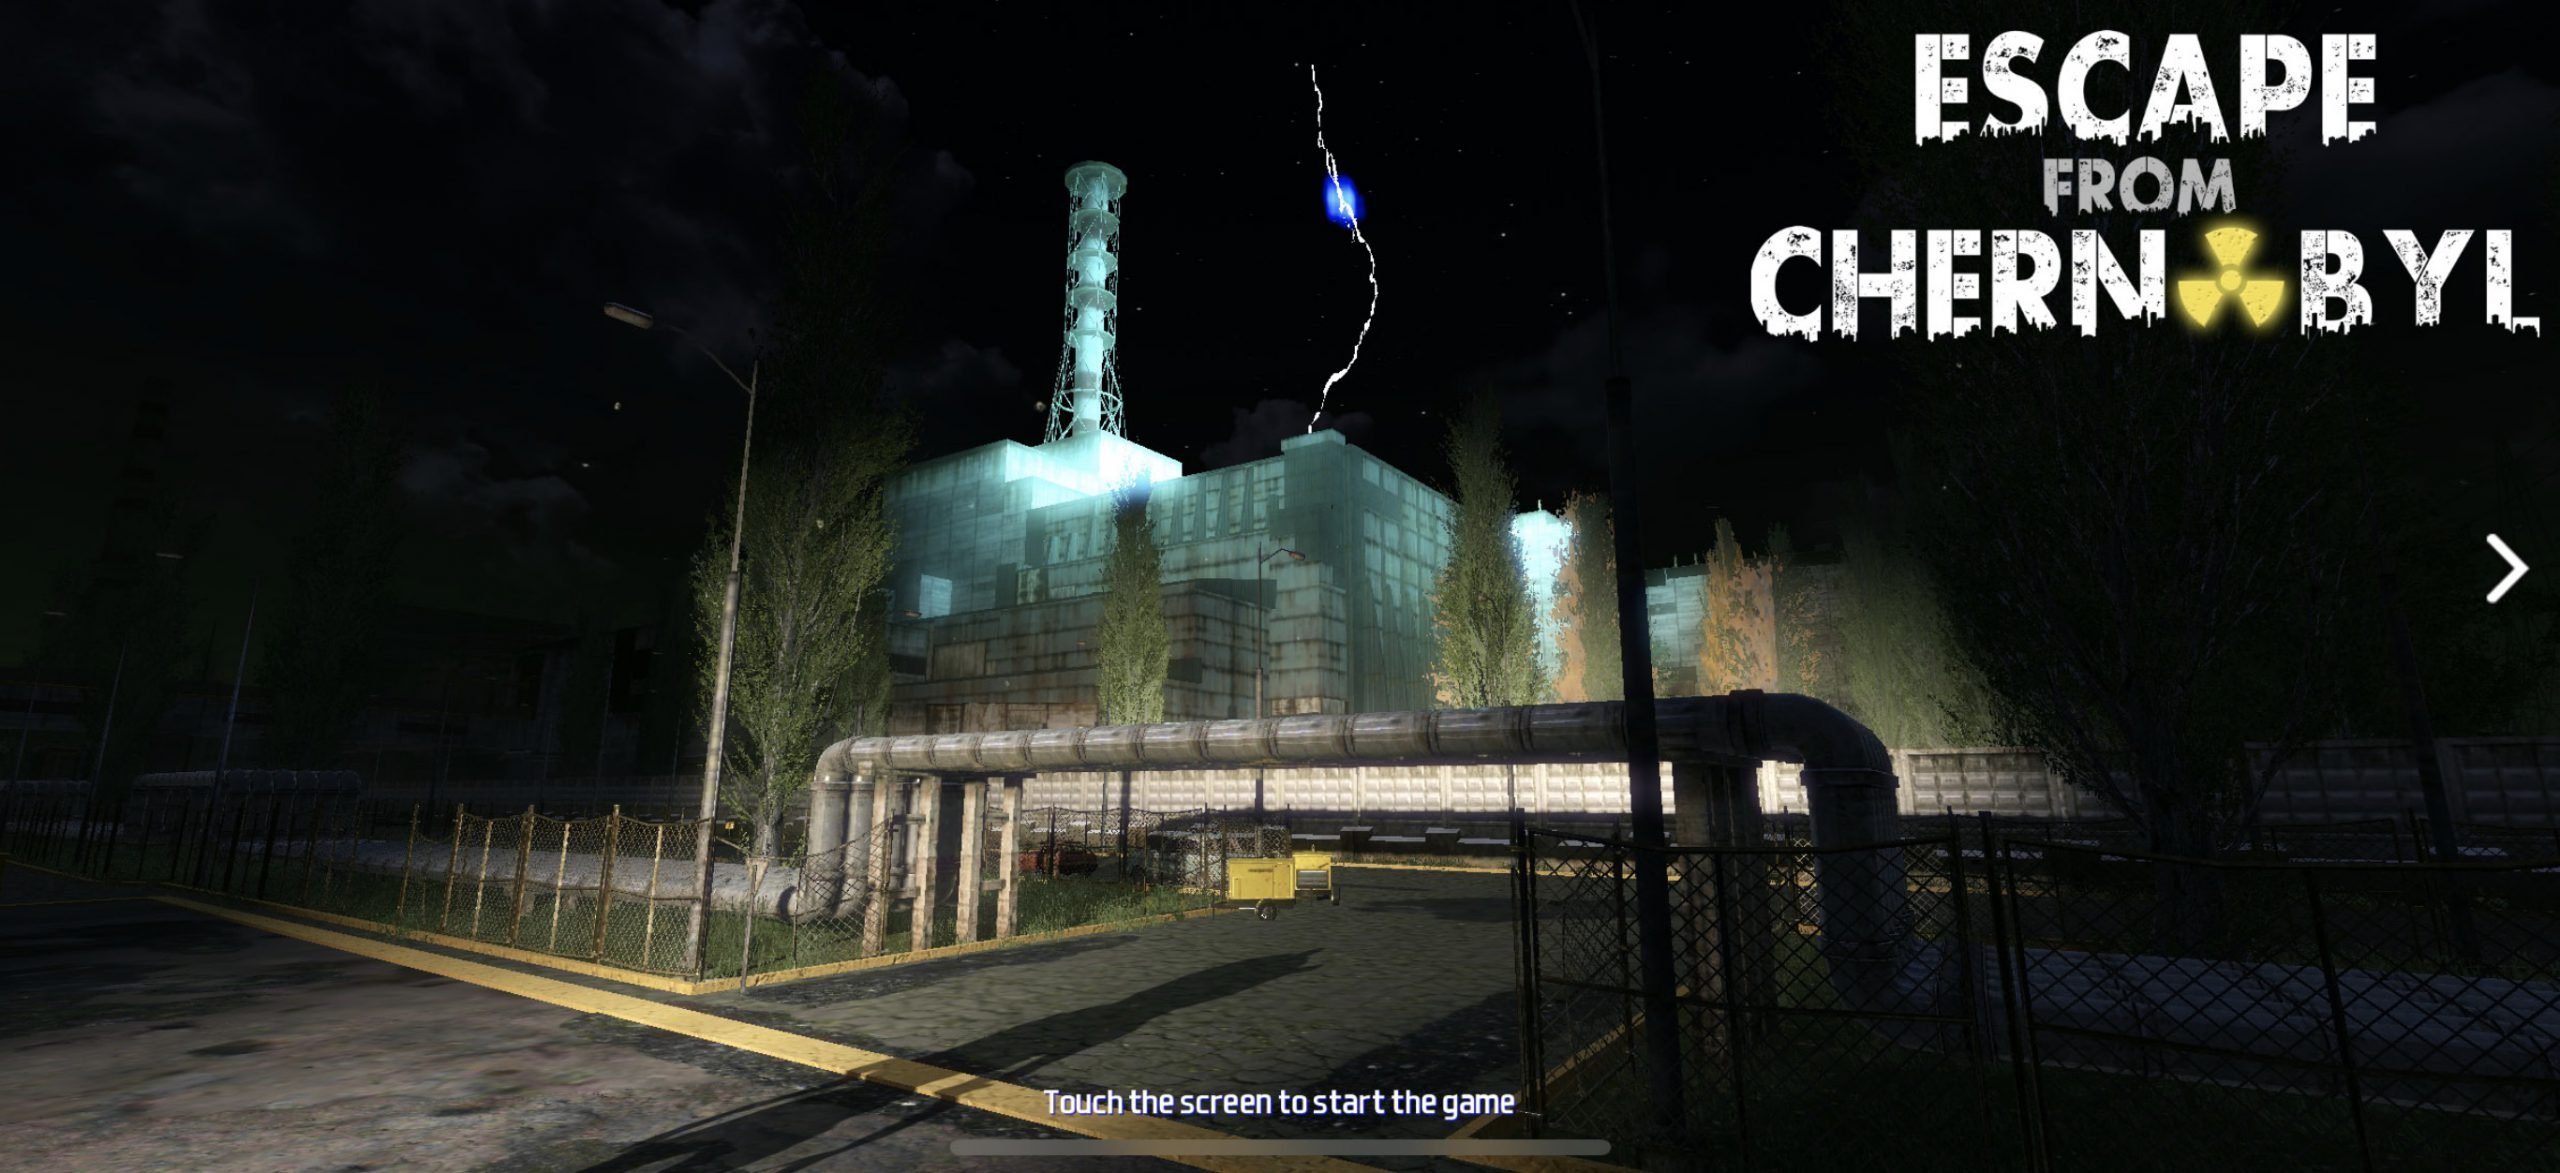 Escape From Chernobyl is a new open world FPS for iOS devices